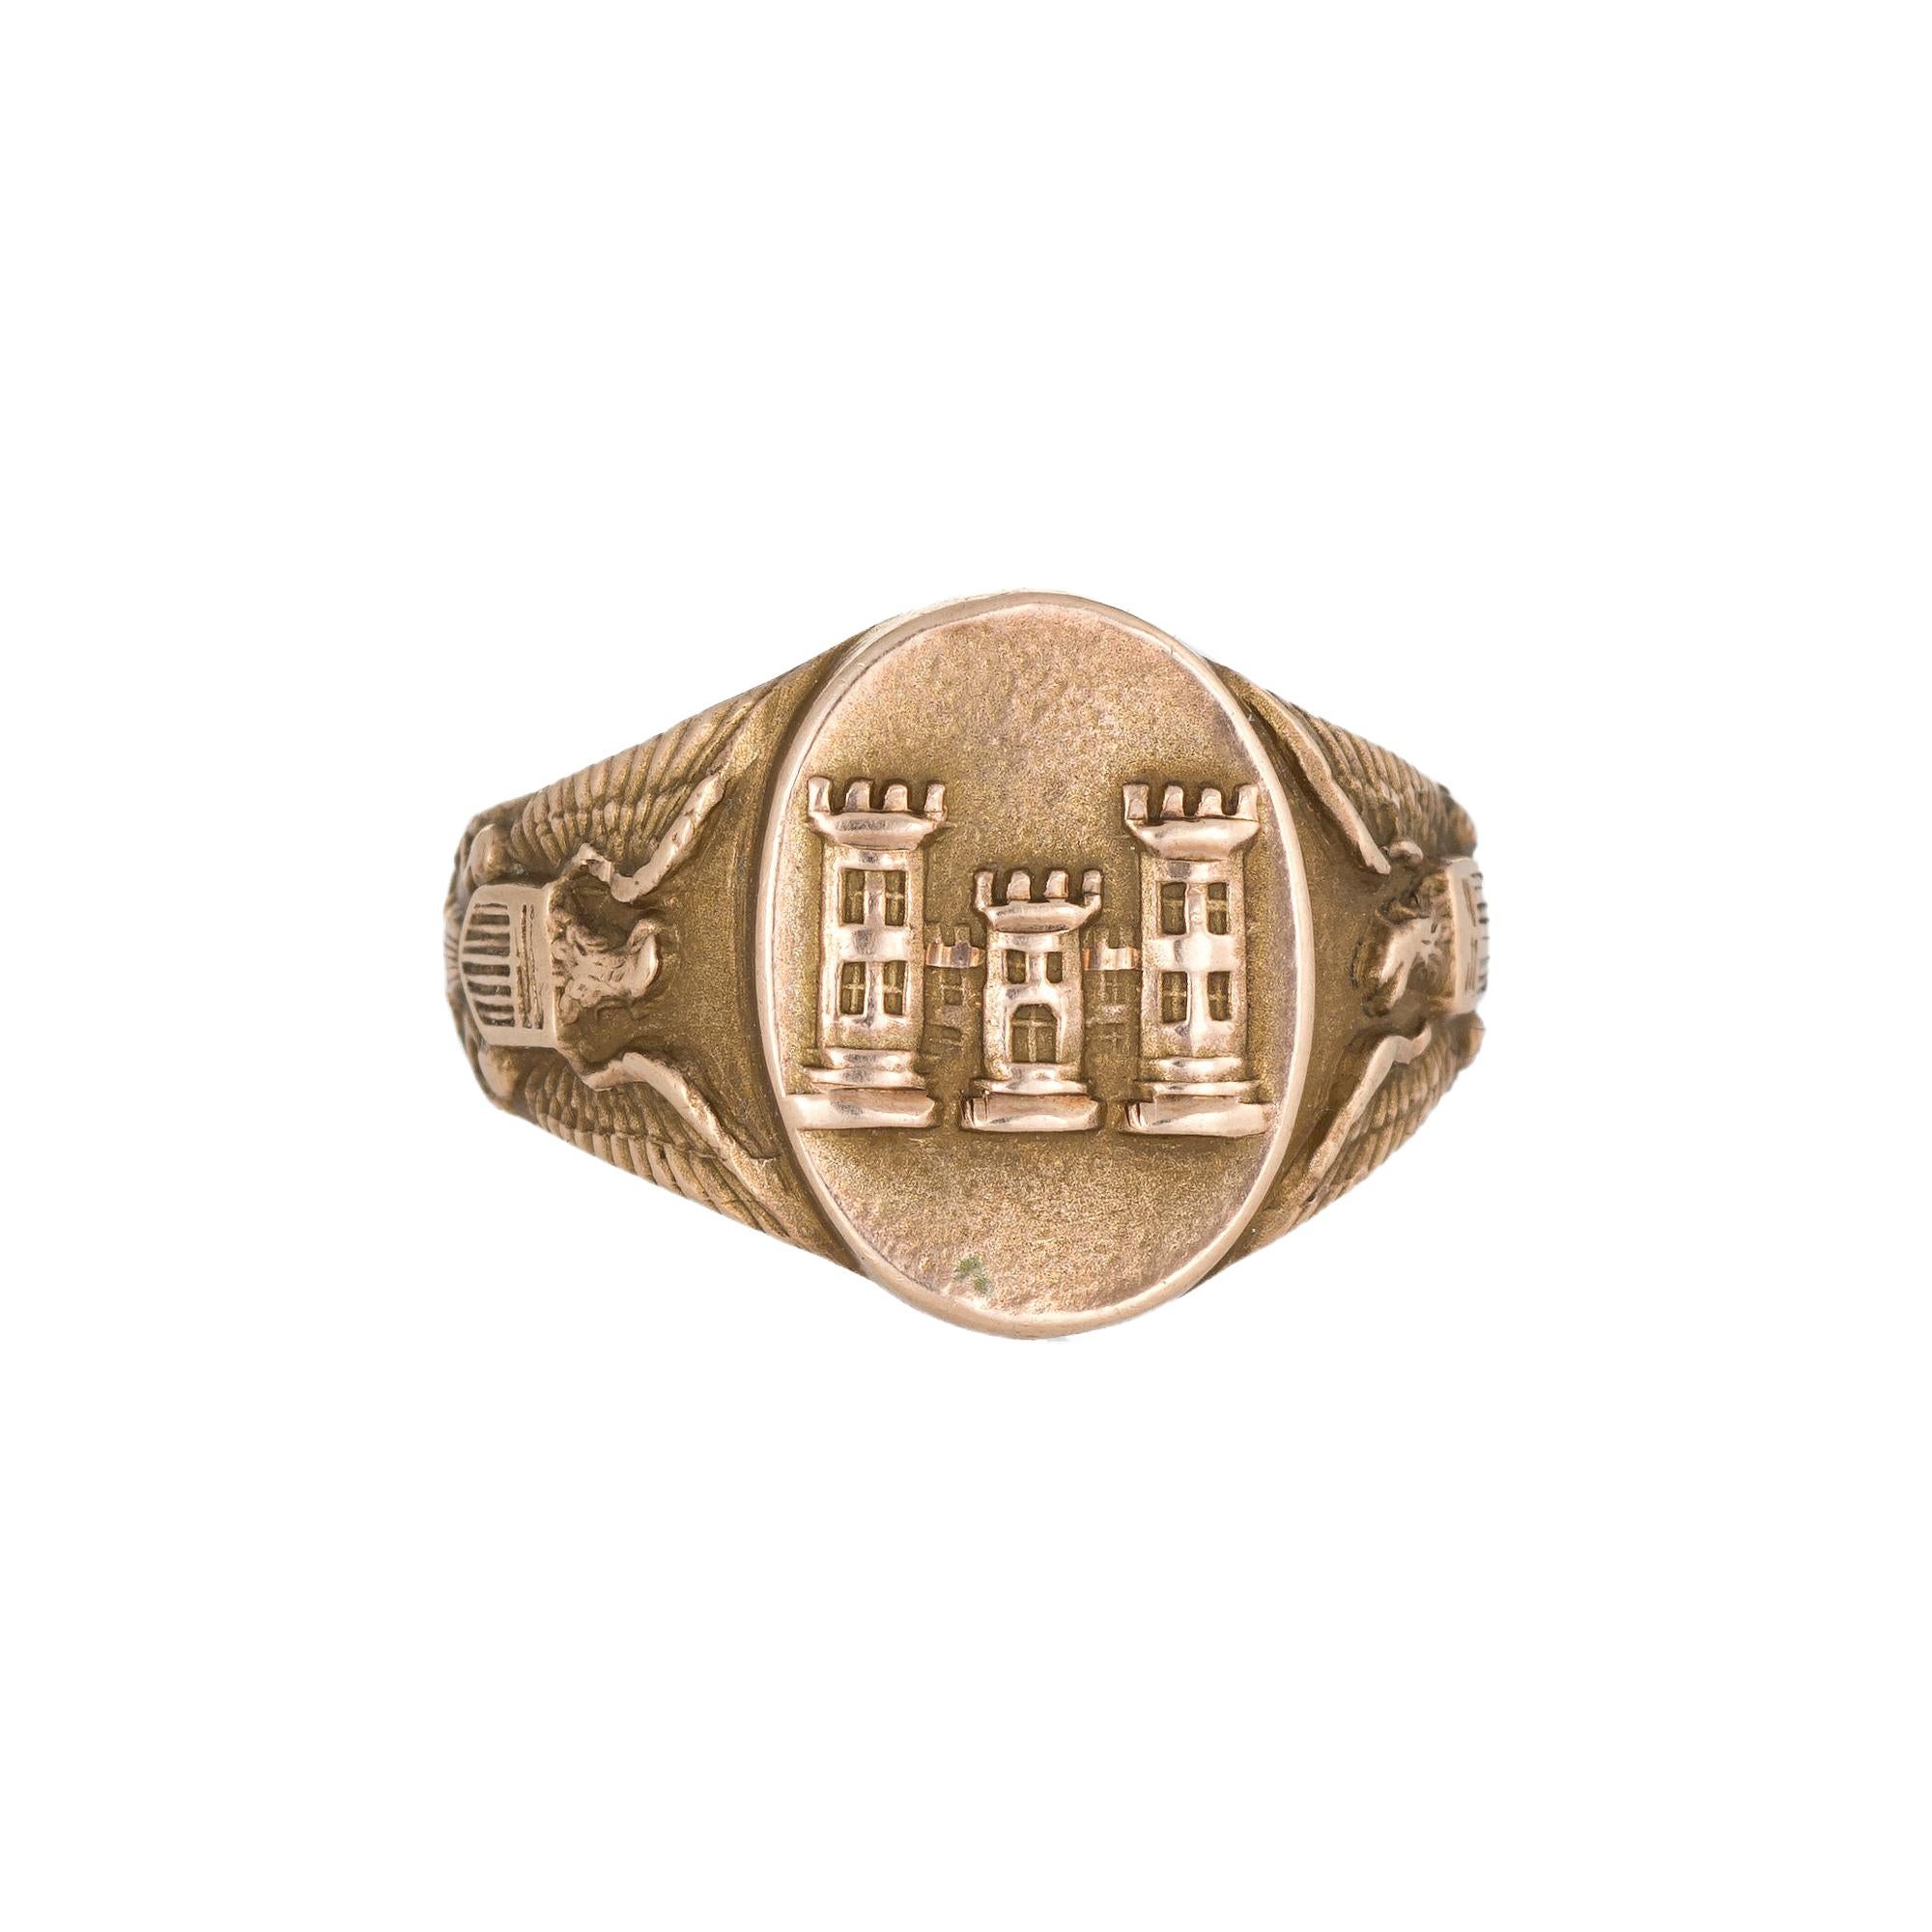 US Army Corps of Engineers Signet Ring Antique Edwardian c1918 10k Gold Sz 5.25